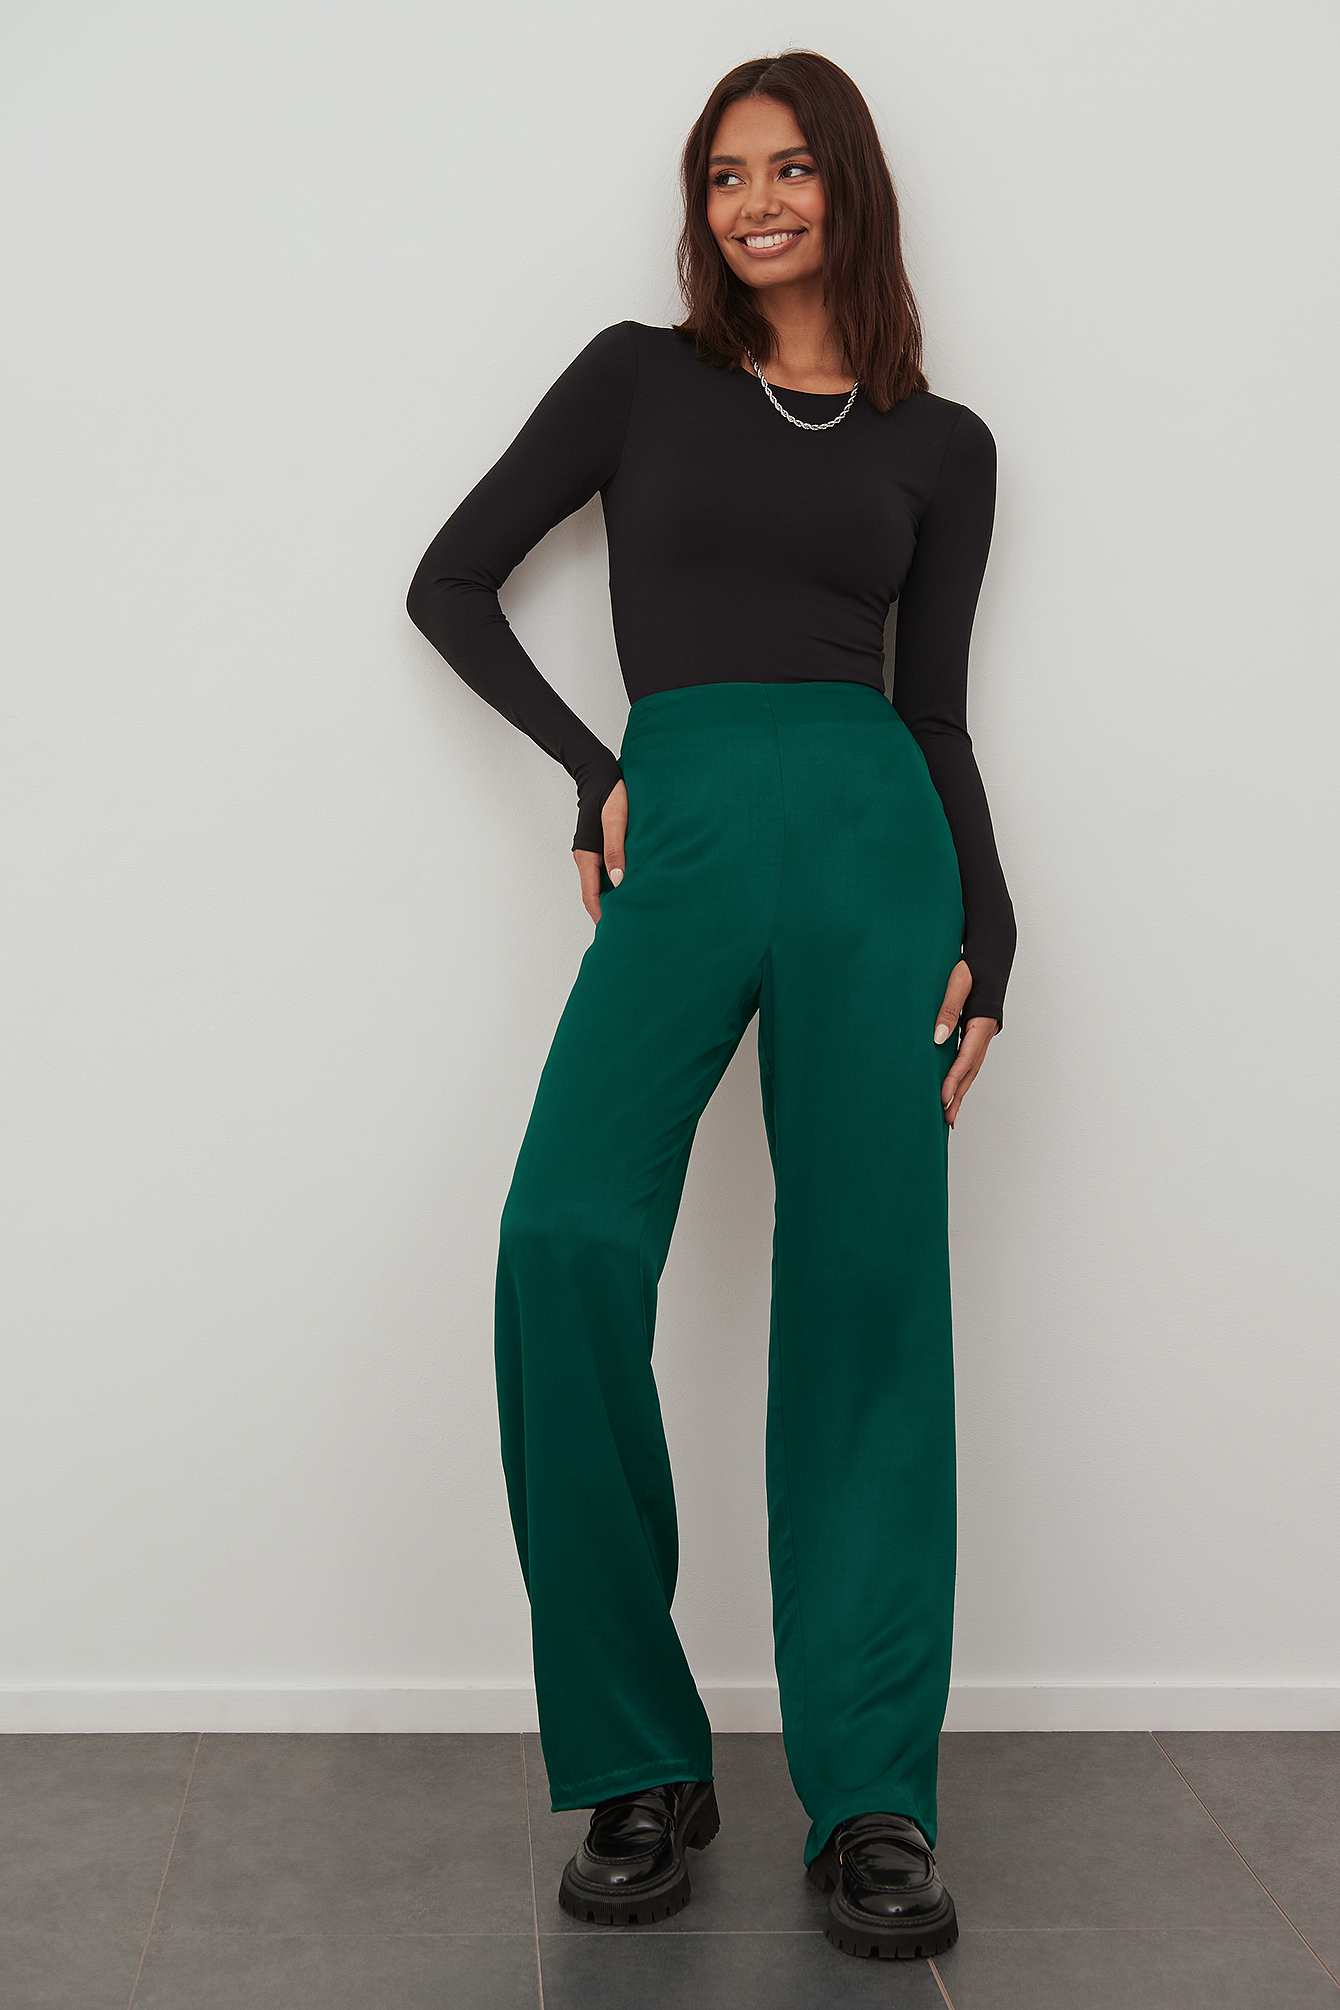 High Waist Flowy Satin Trousers Outfit.